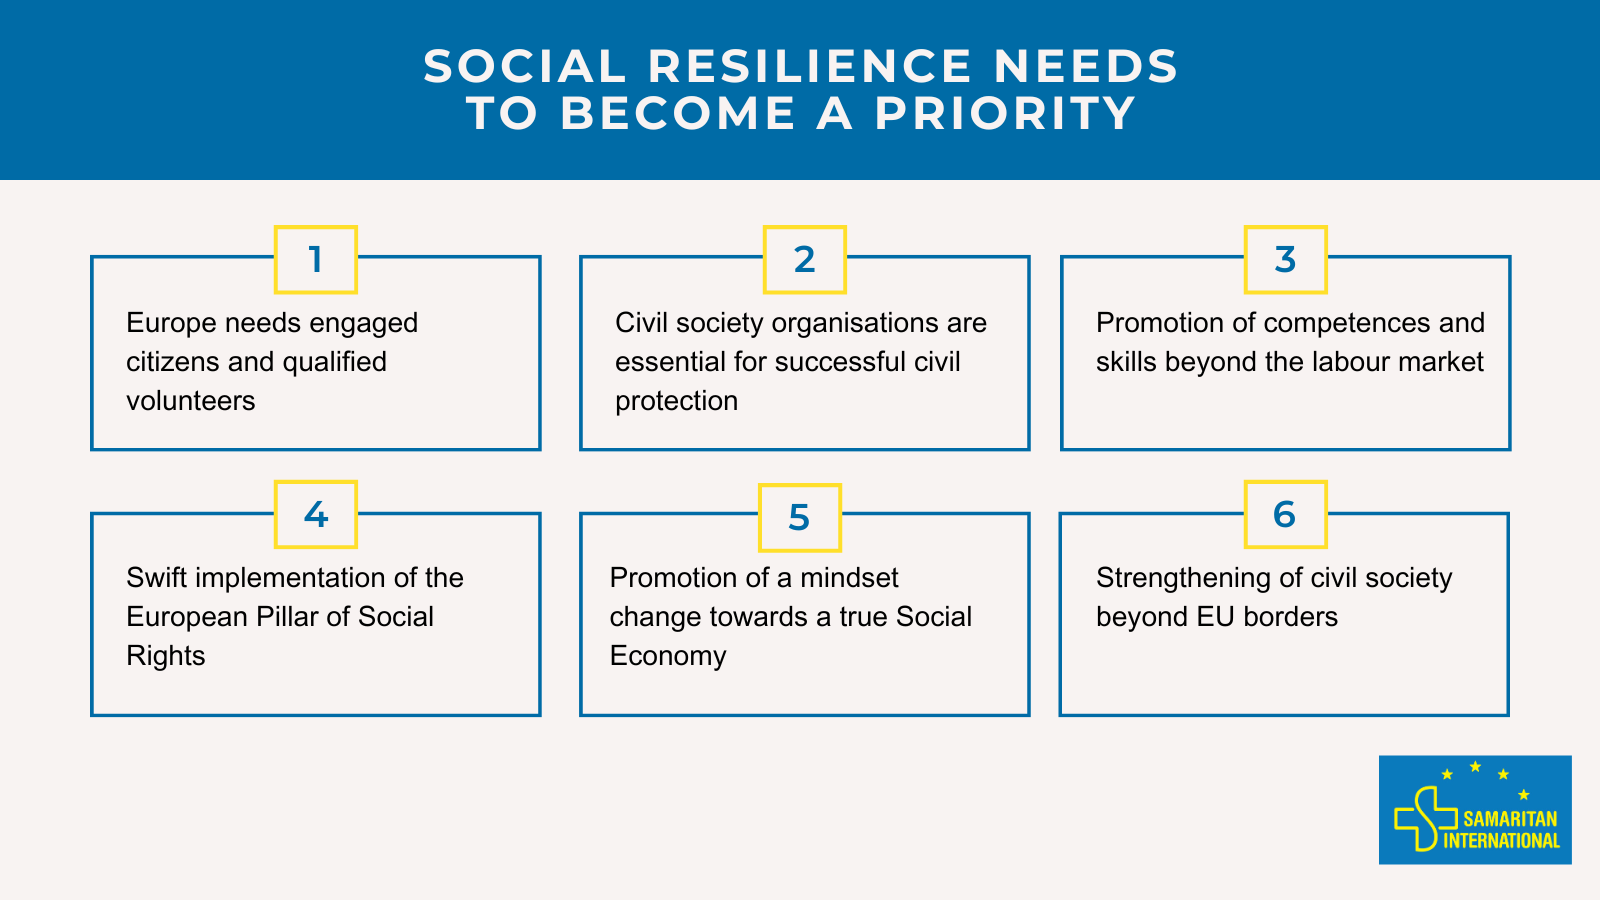 Social resilience needs to become a priority